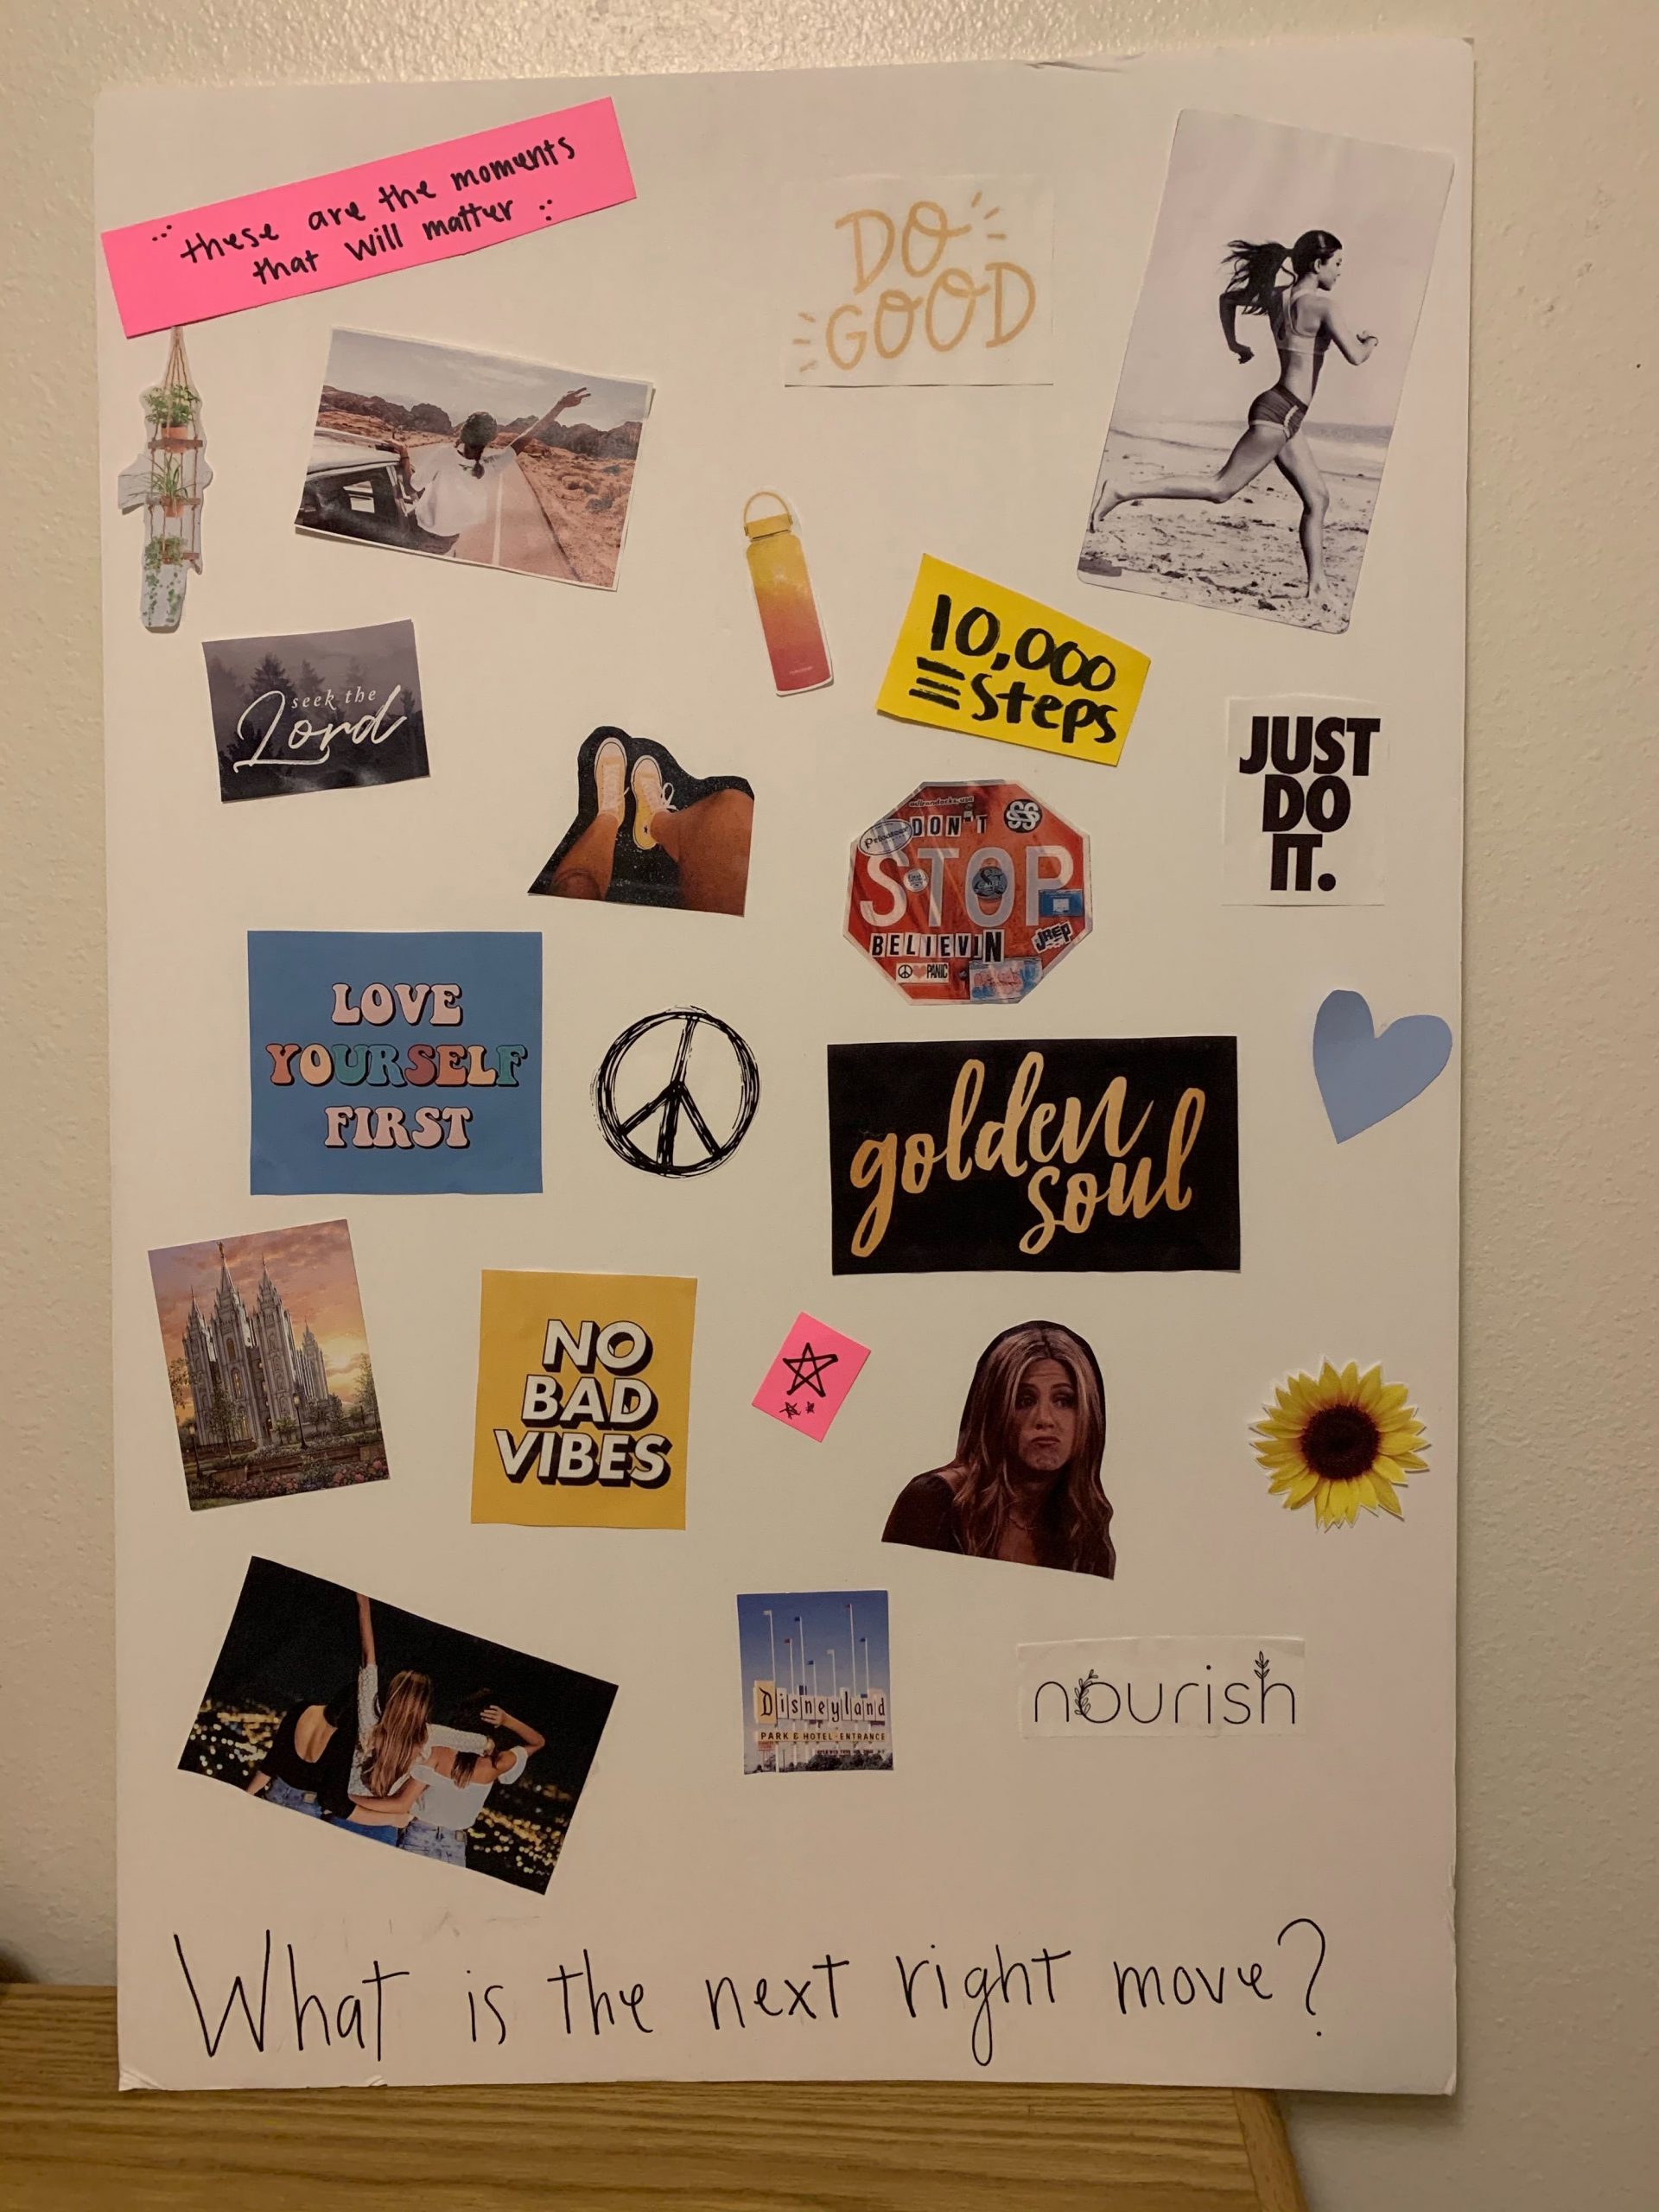 Fighting the anxiety: vision boards - The Utah Statesman